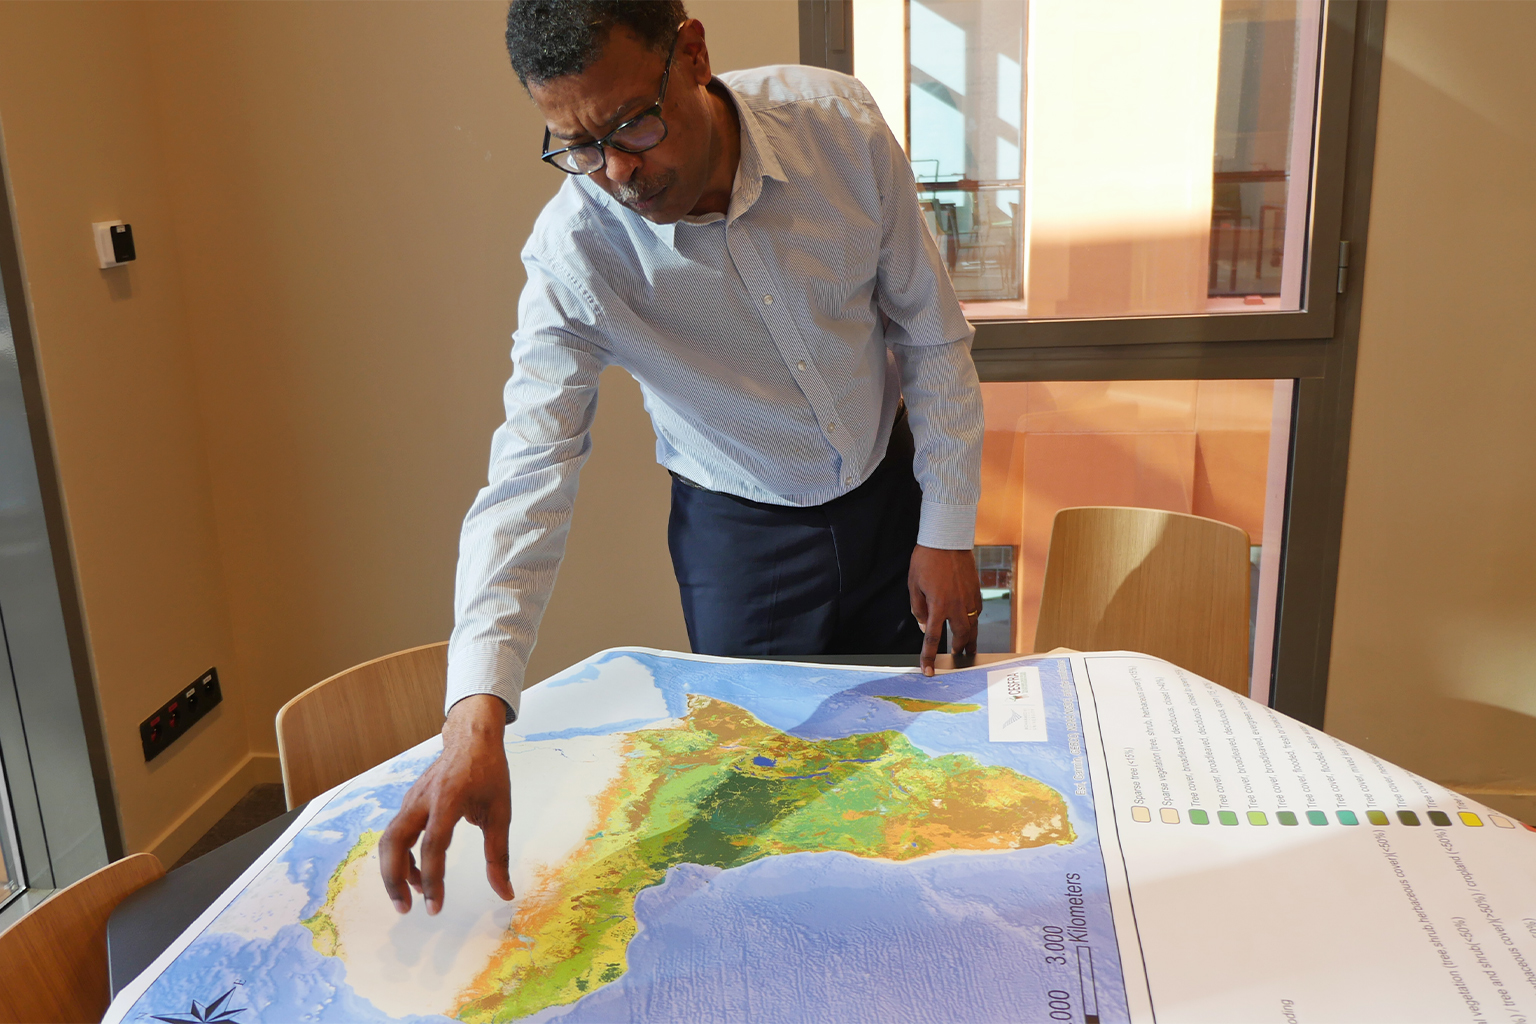 Soil scientist Fassil Kebede leaning over map of soil in Africa.